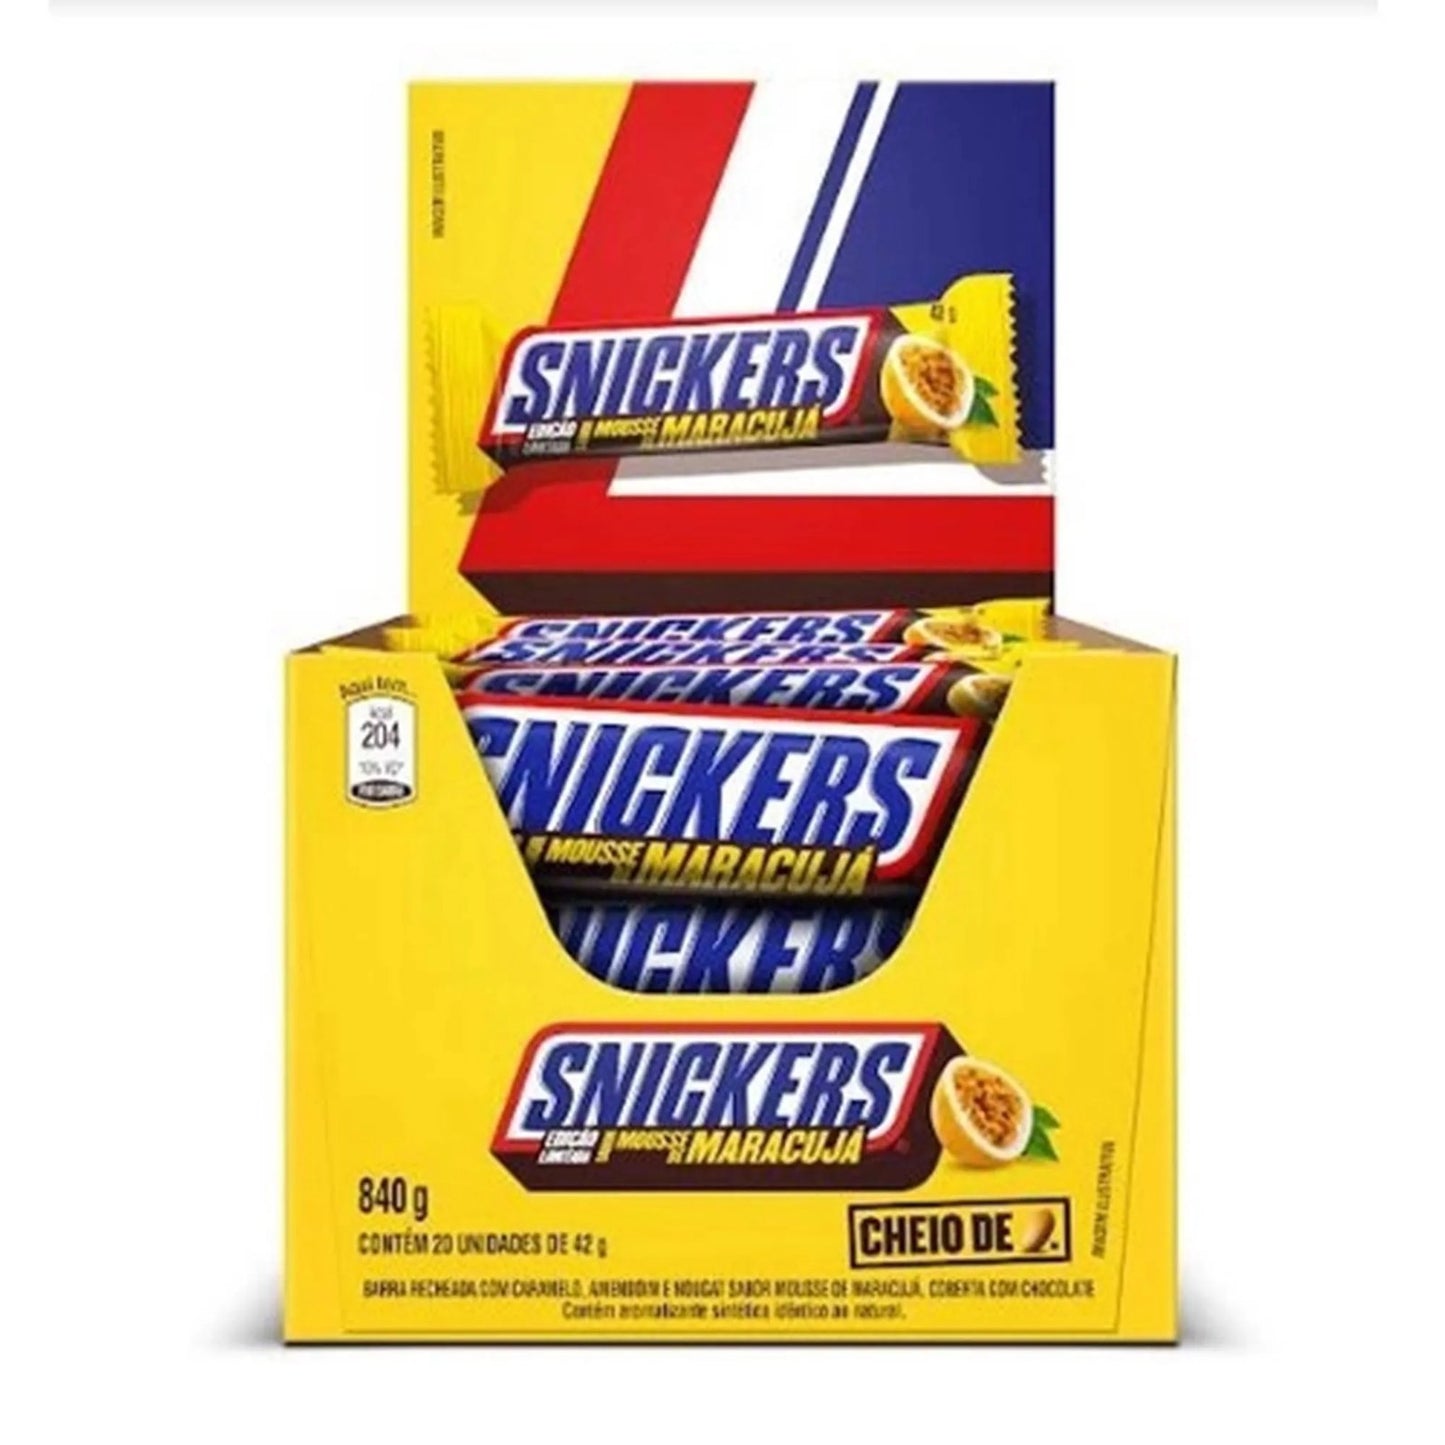 CHOCOLATE SNICKERS MOUSSE DE MARACUJA (42g) (20ct.) (Brazil)